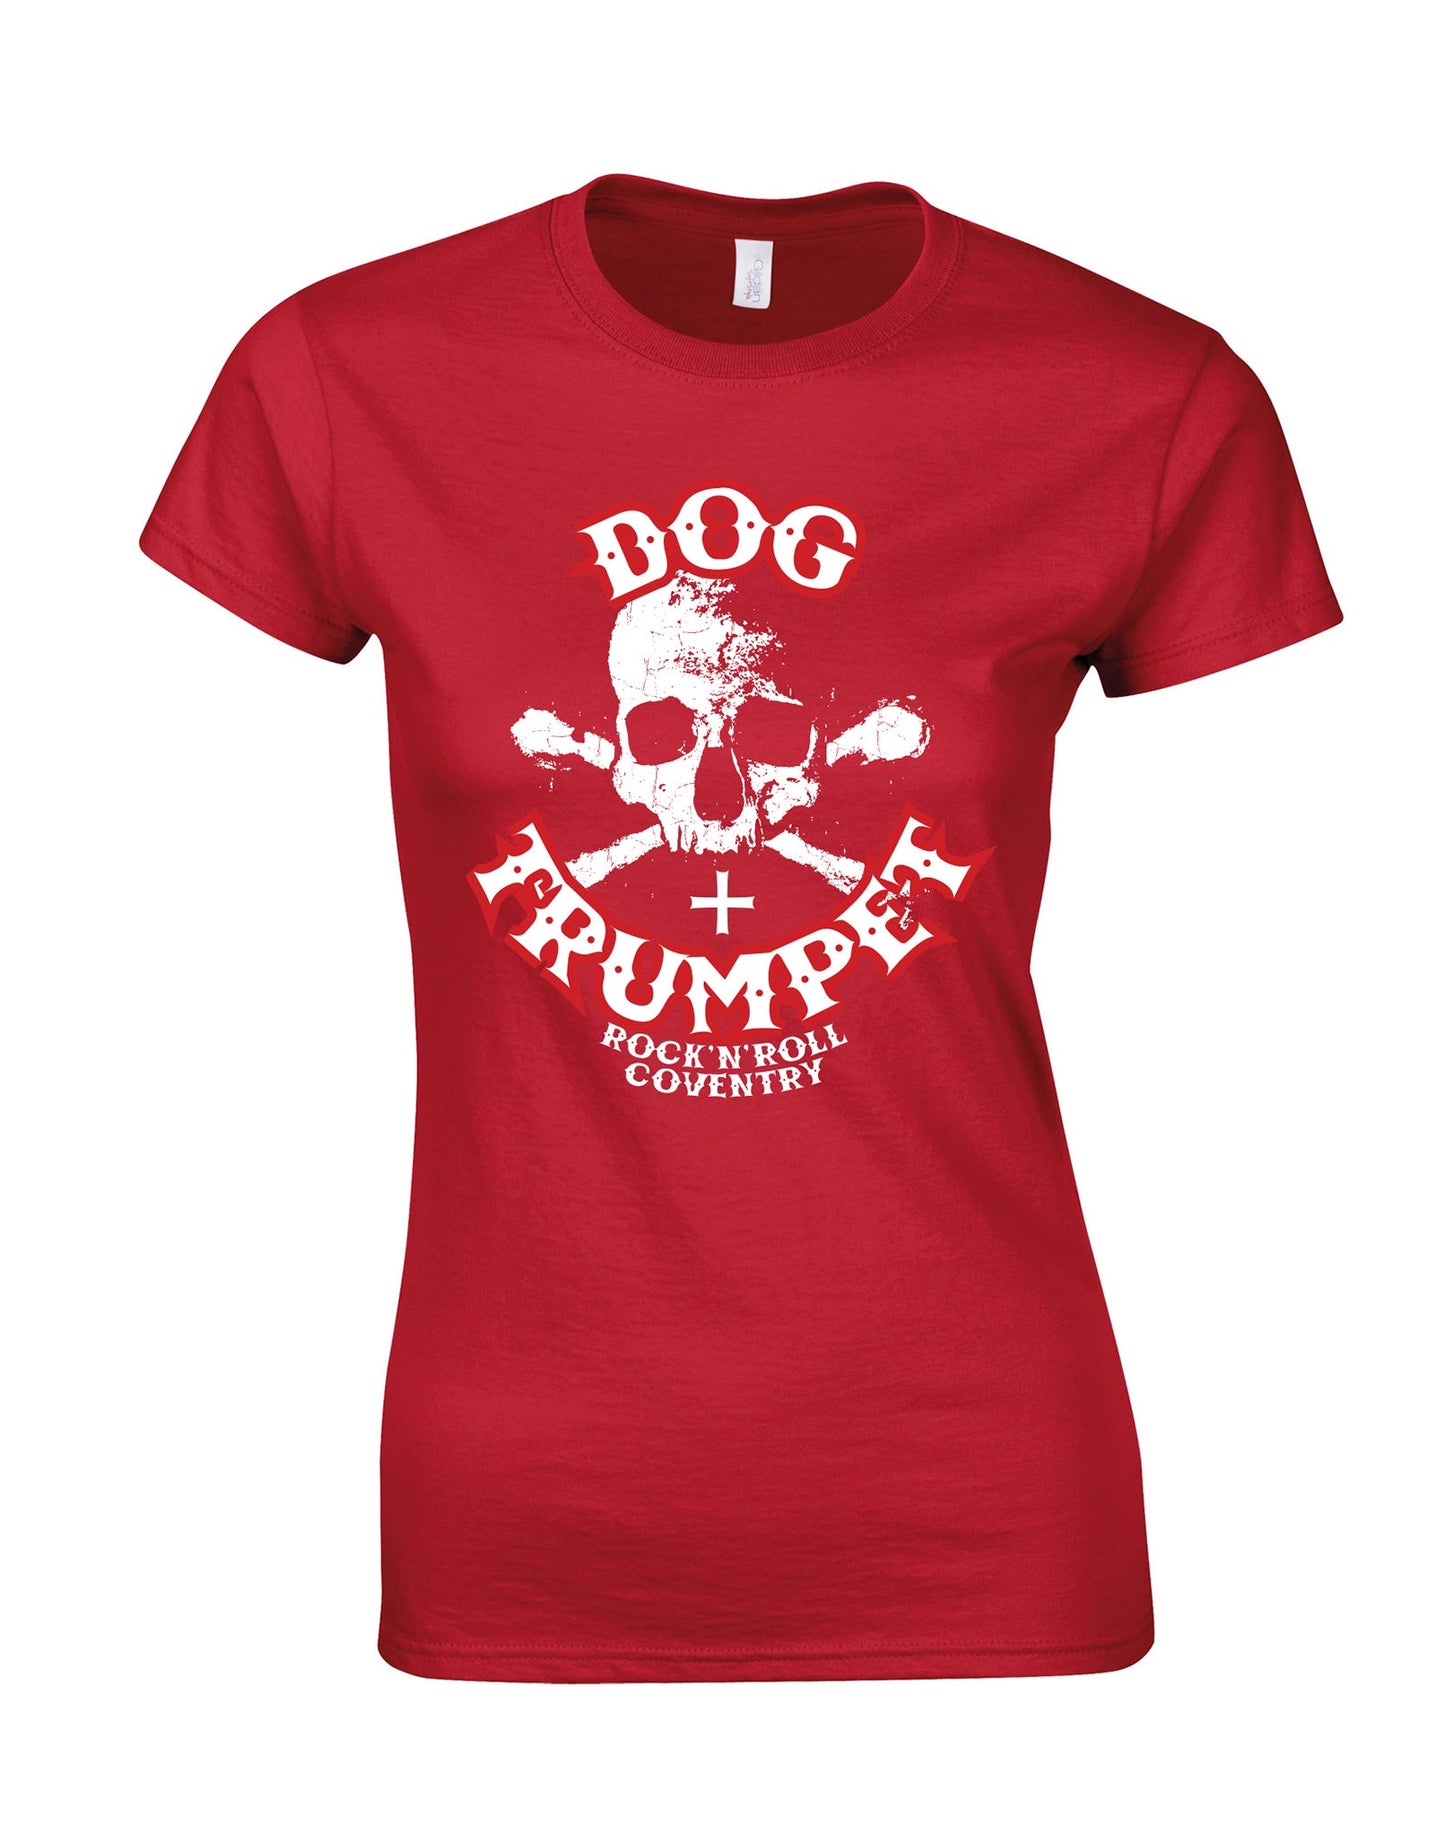 Dog & Trumpet (with skull) ladies fit t-shirt- various colours - Dirty Stop Outs